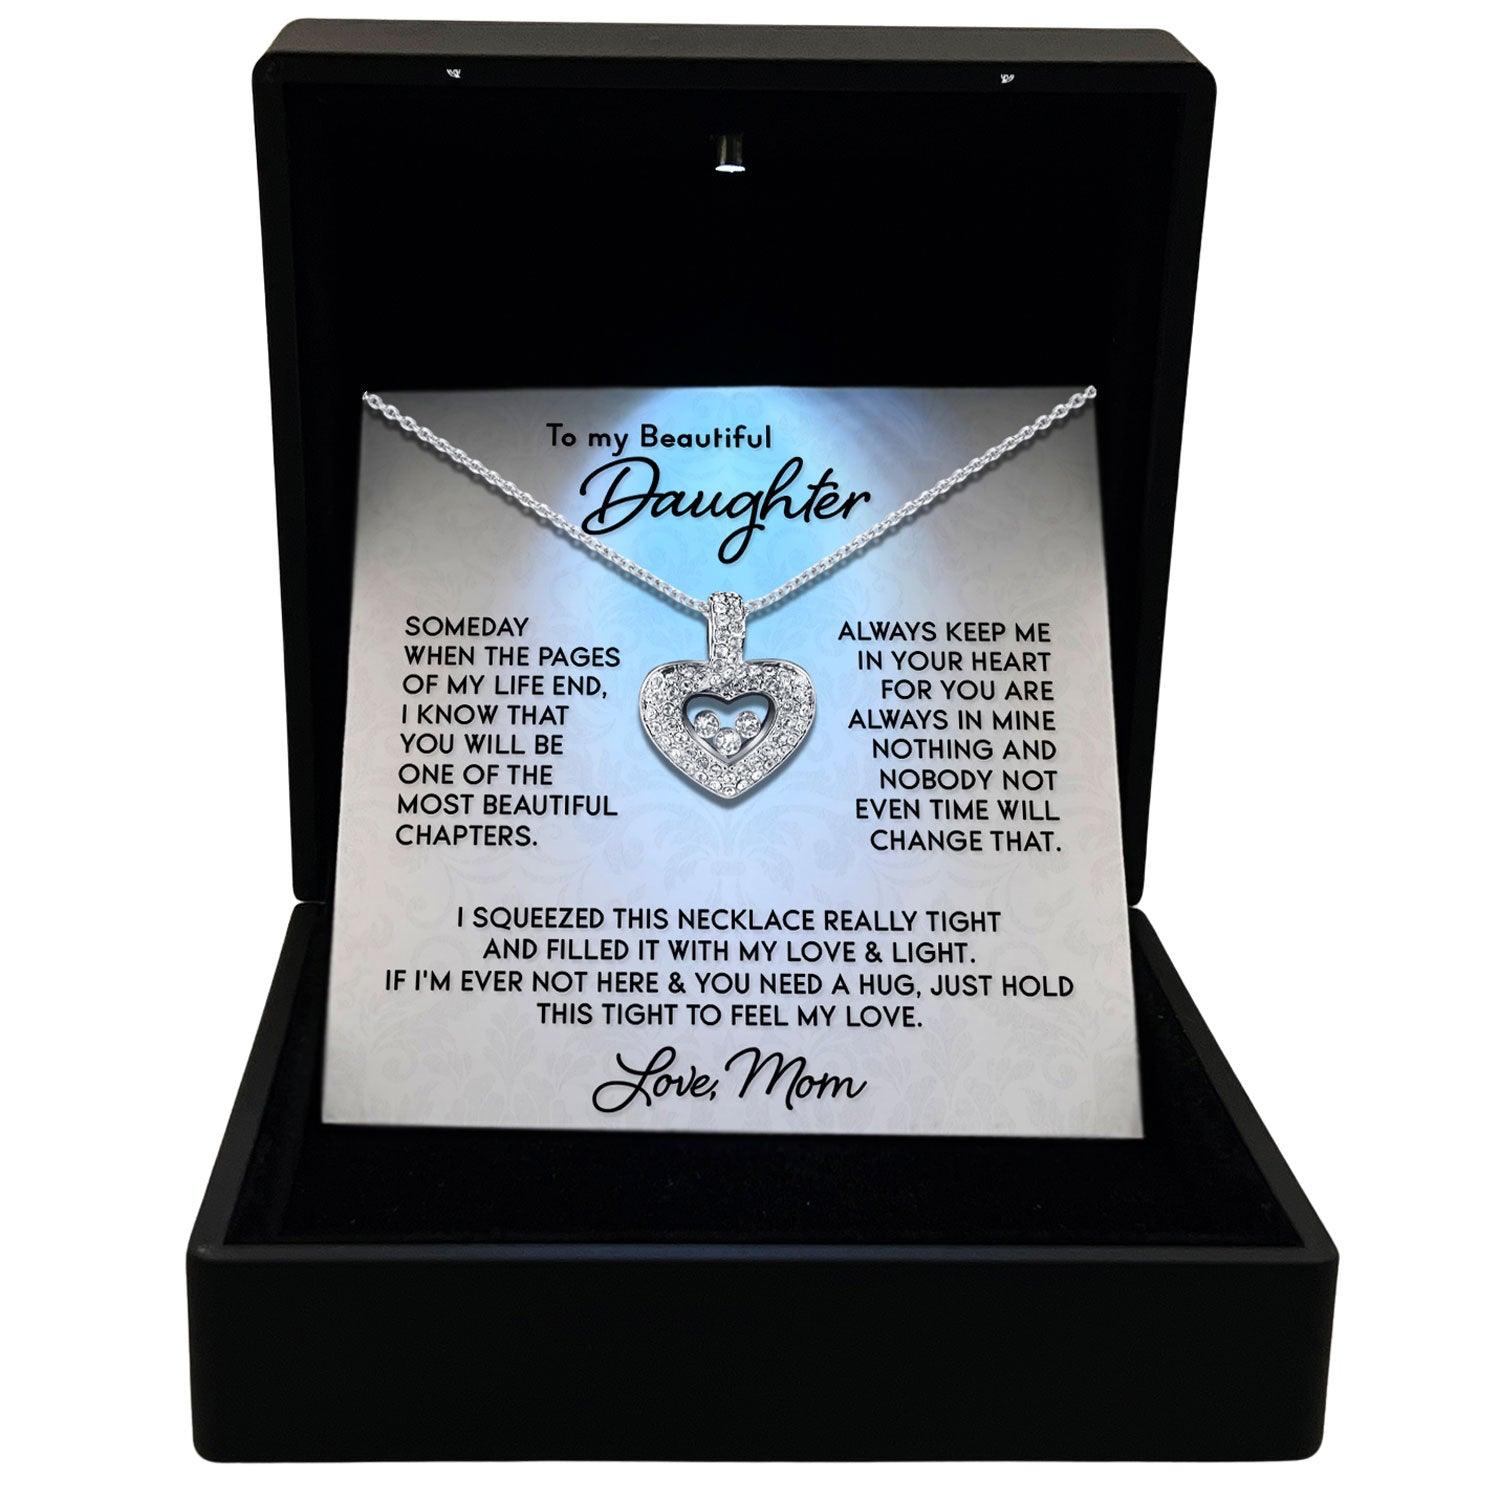 To My Beautiful Daughter - You Will Be One of The Most Beautiful Chapters of My Life - Tryndi Floating Heart Necklace - TRYNDI